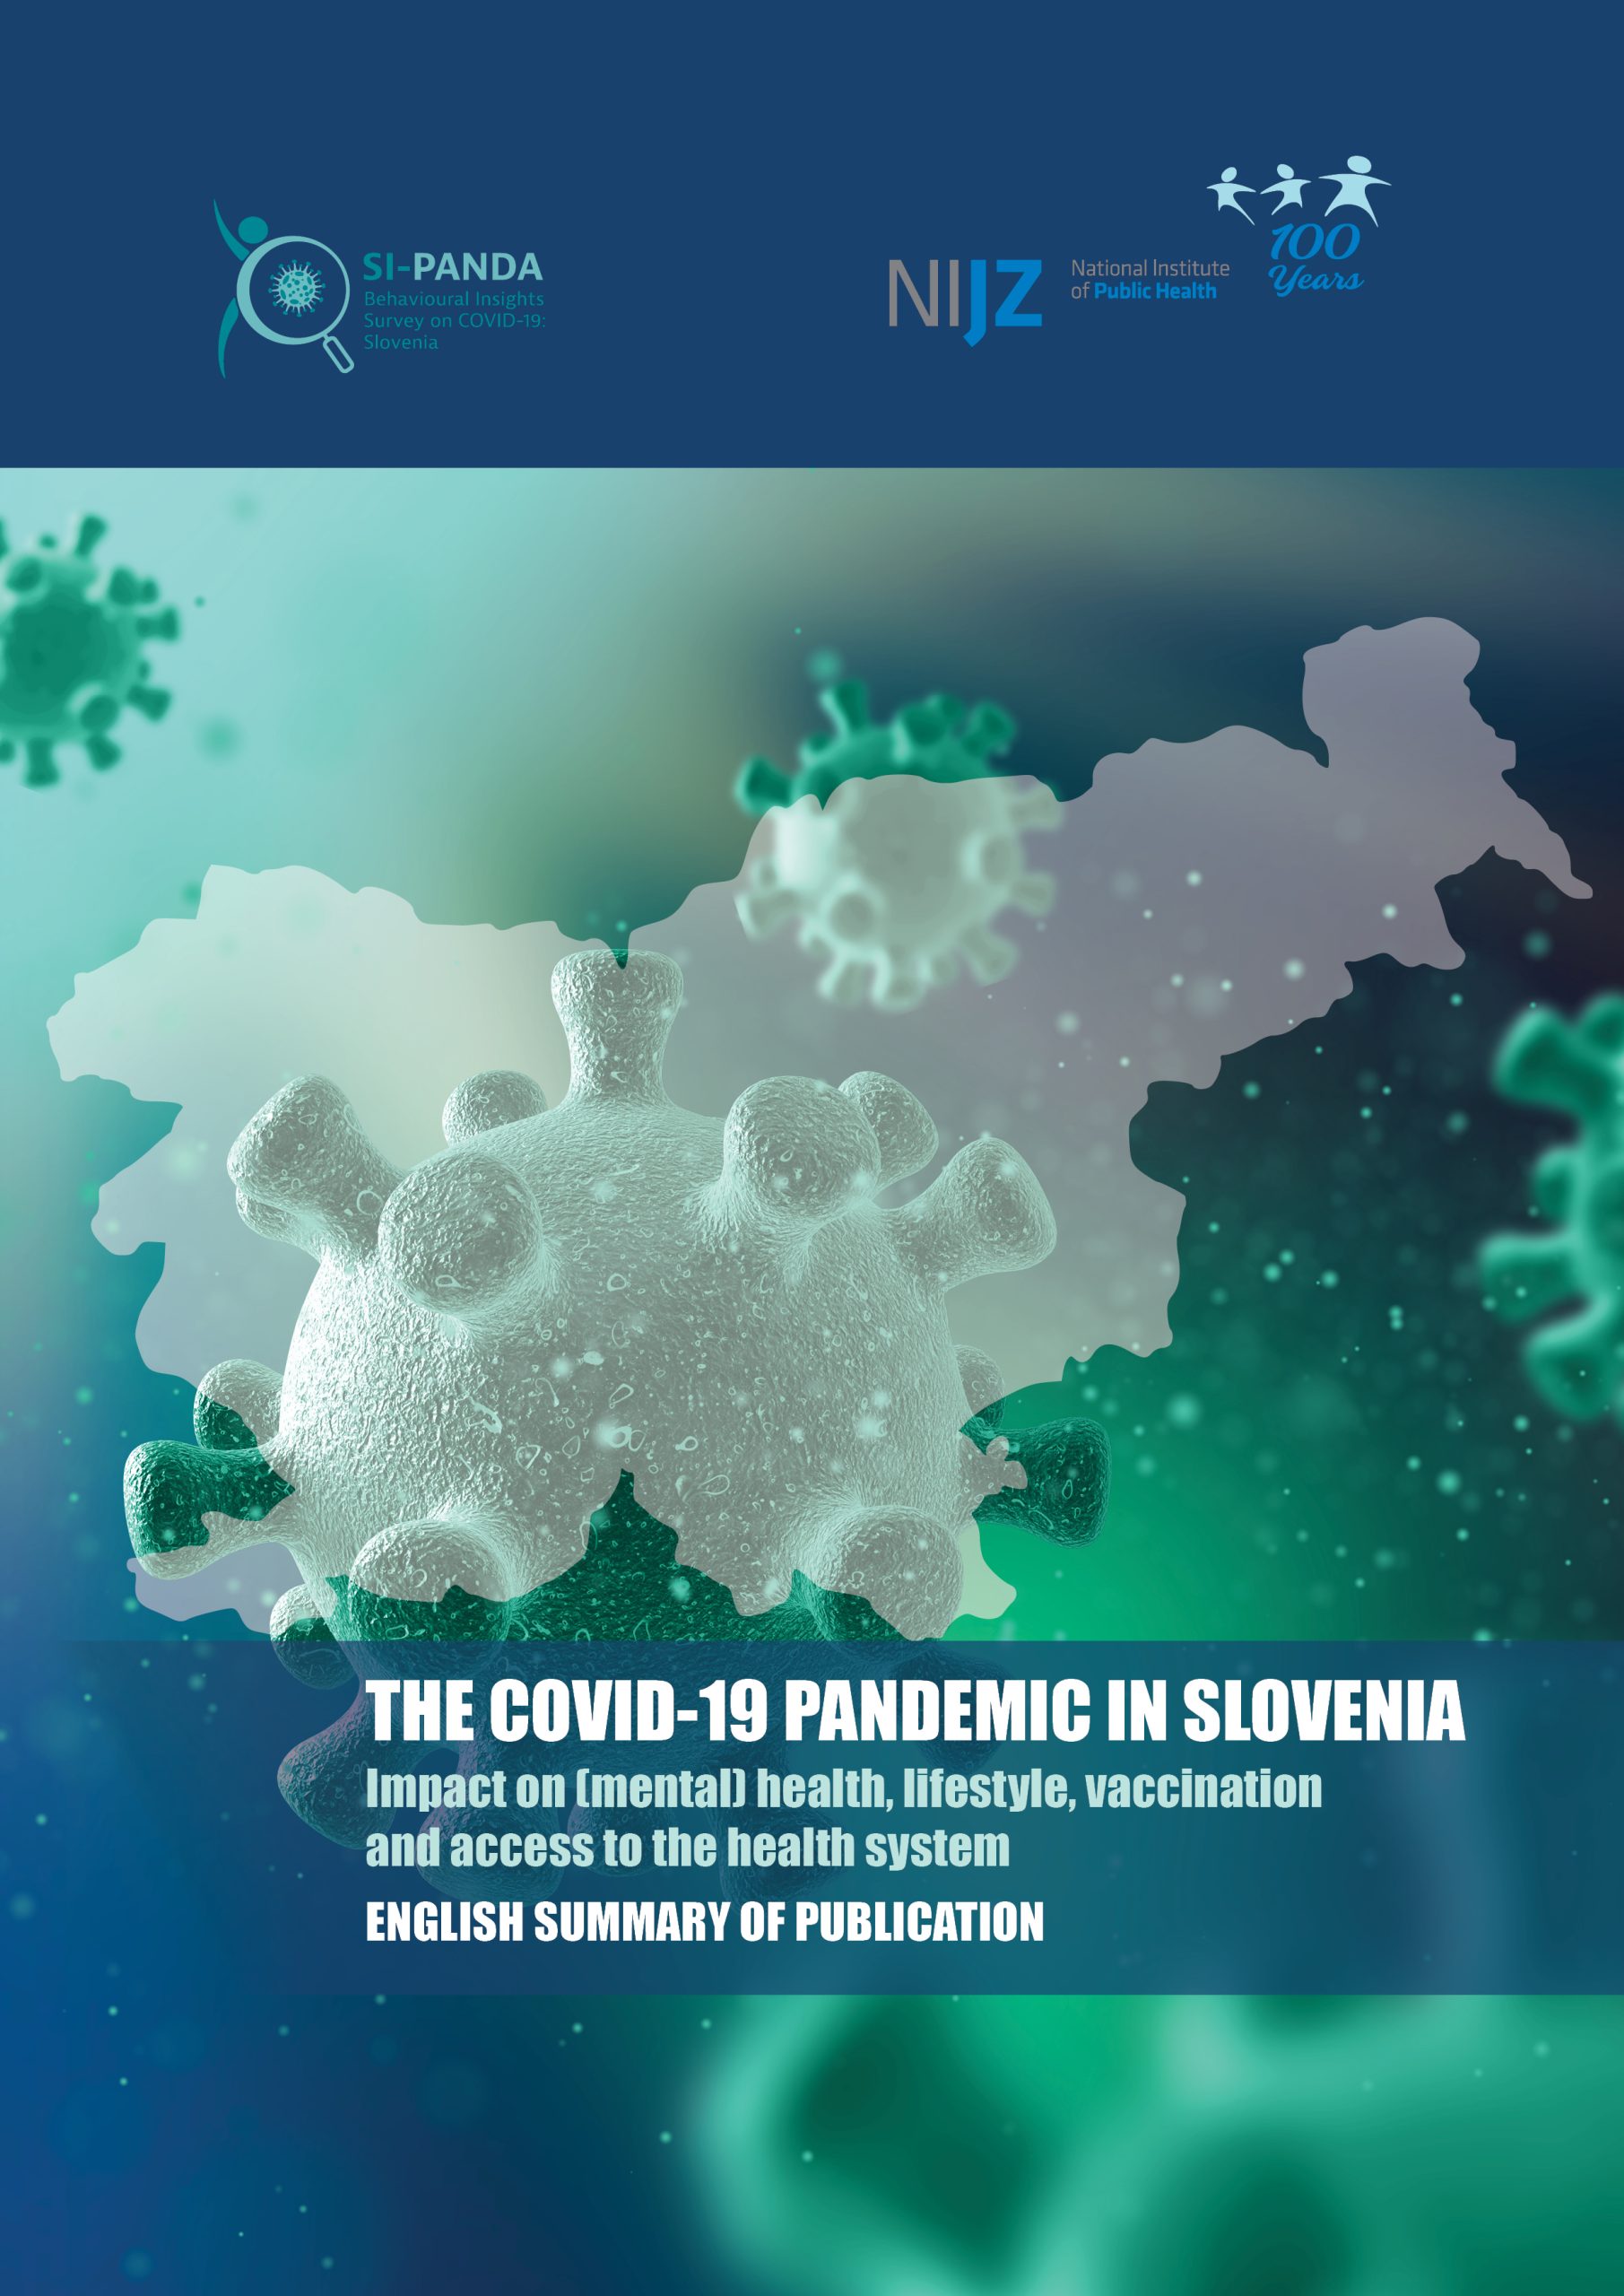 The covid-19 pandemic in Slovenia